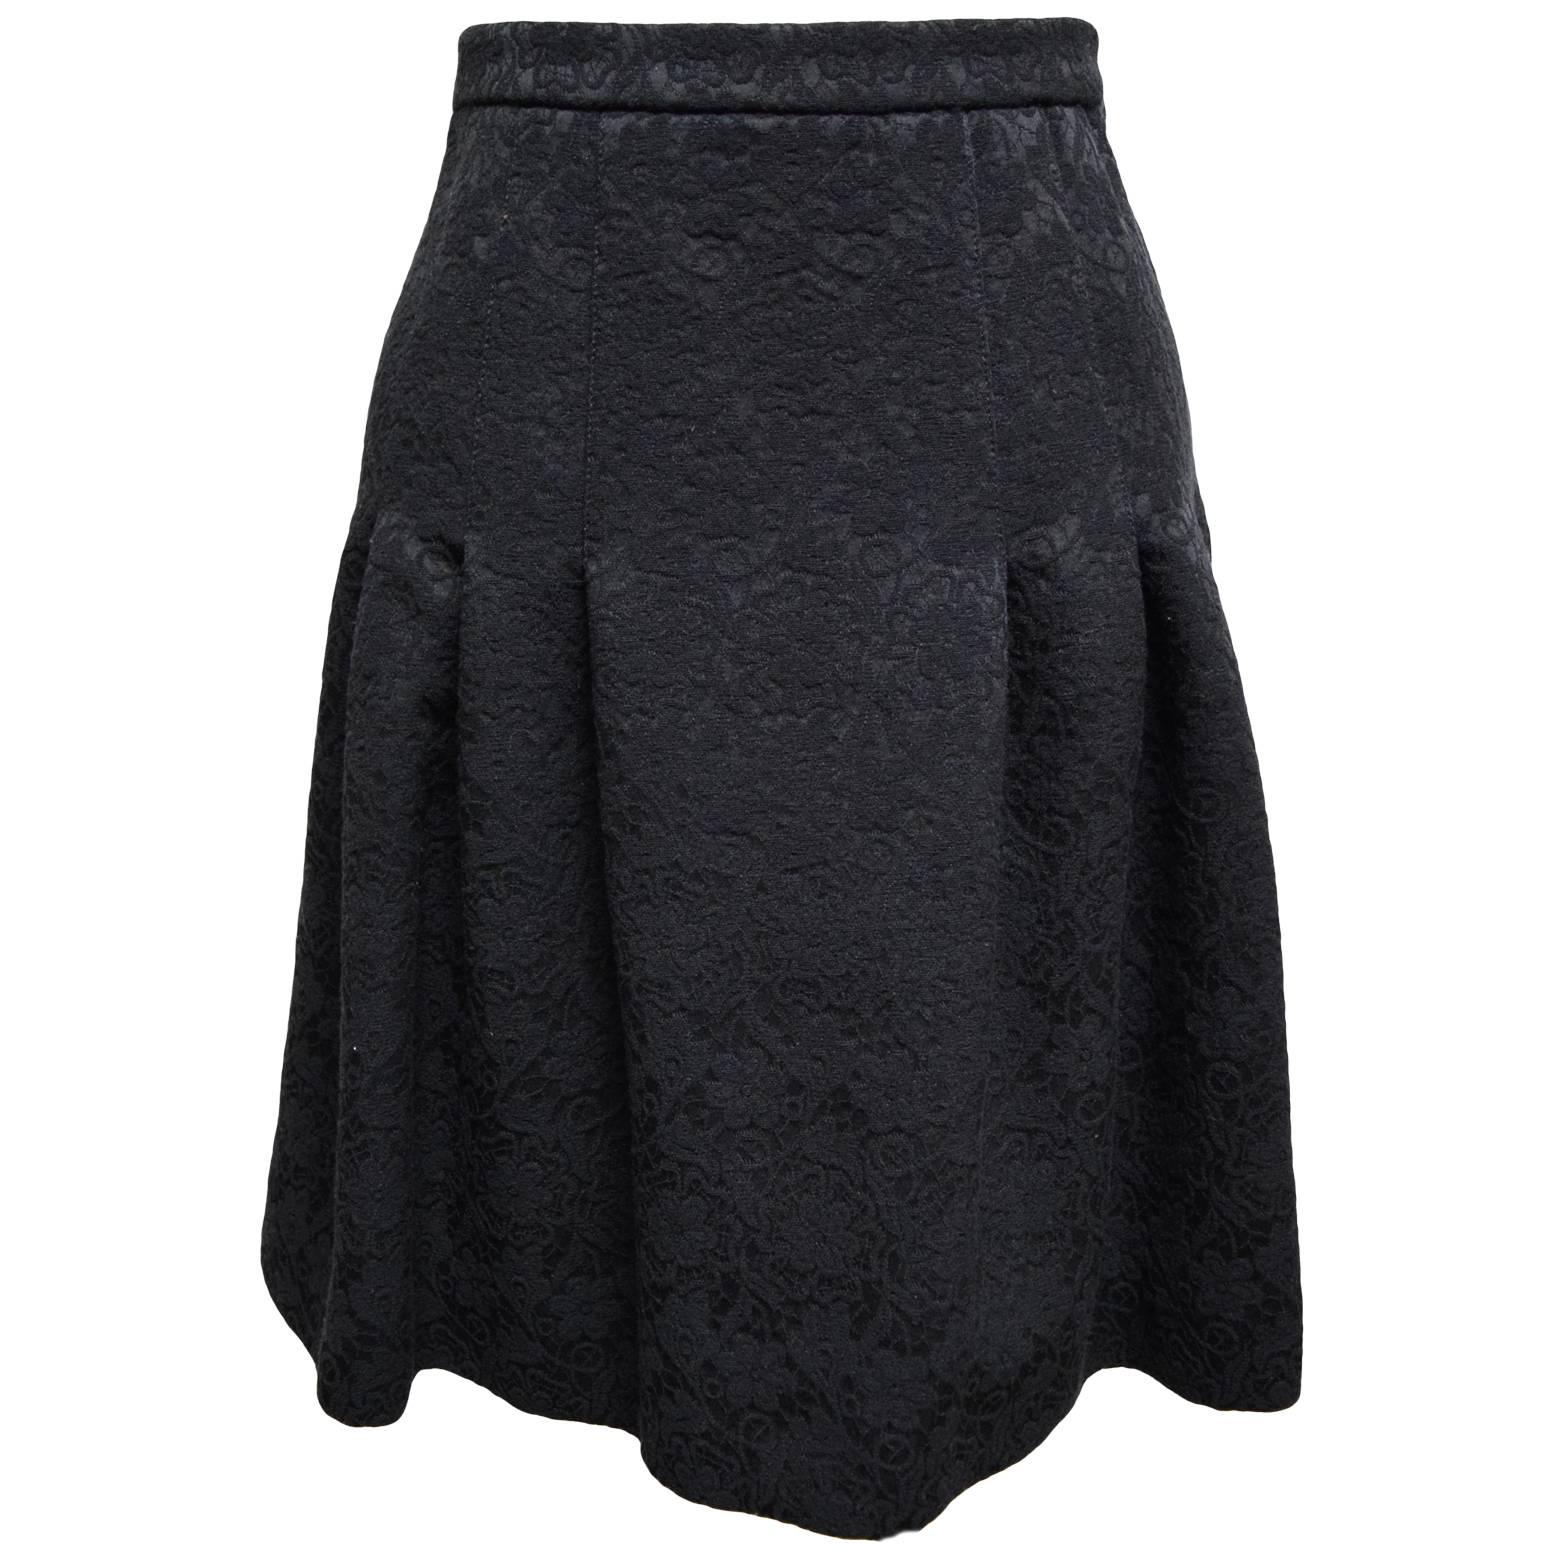 Valentino Black Jacquard Skirt Two Piece Ensemble  In Excellent Condition For Sale In Henrico, VA